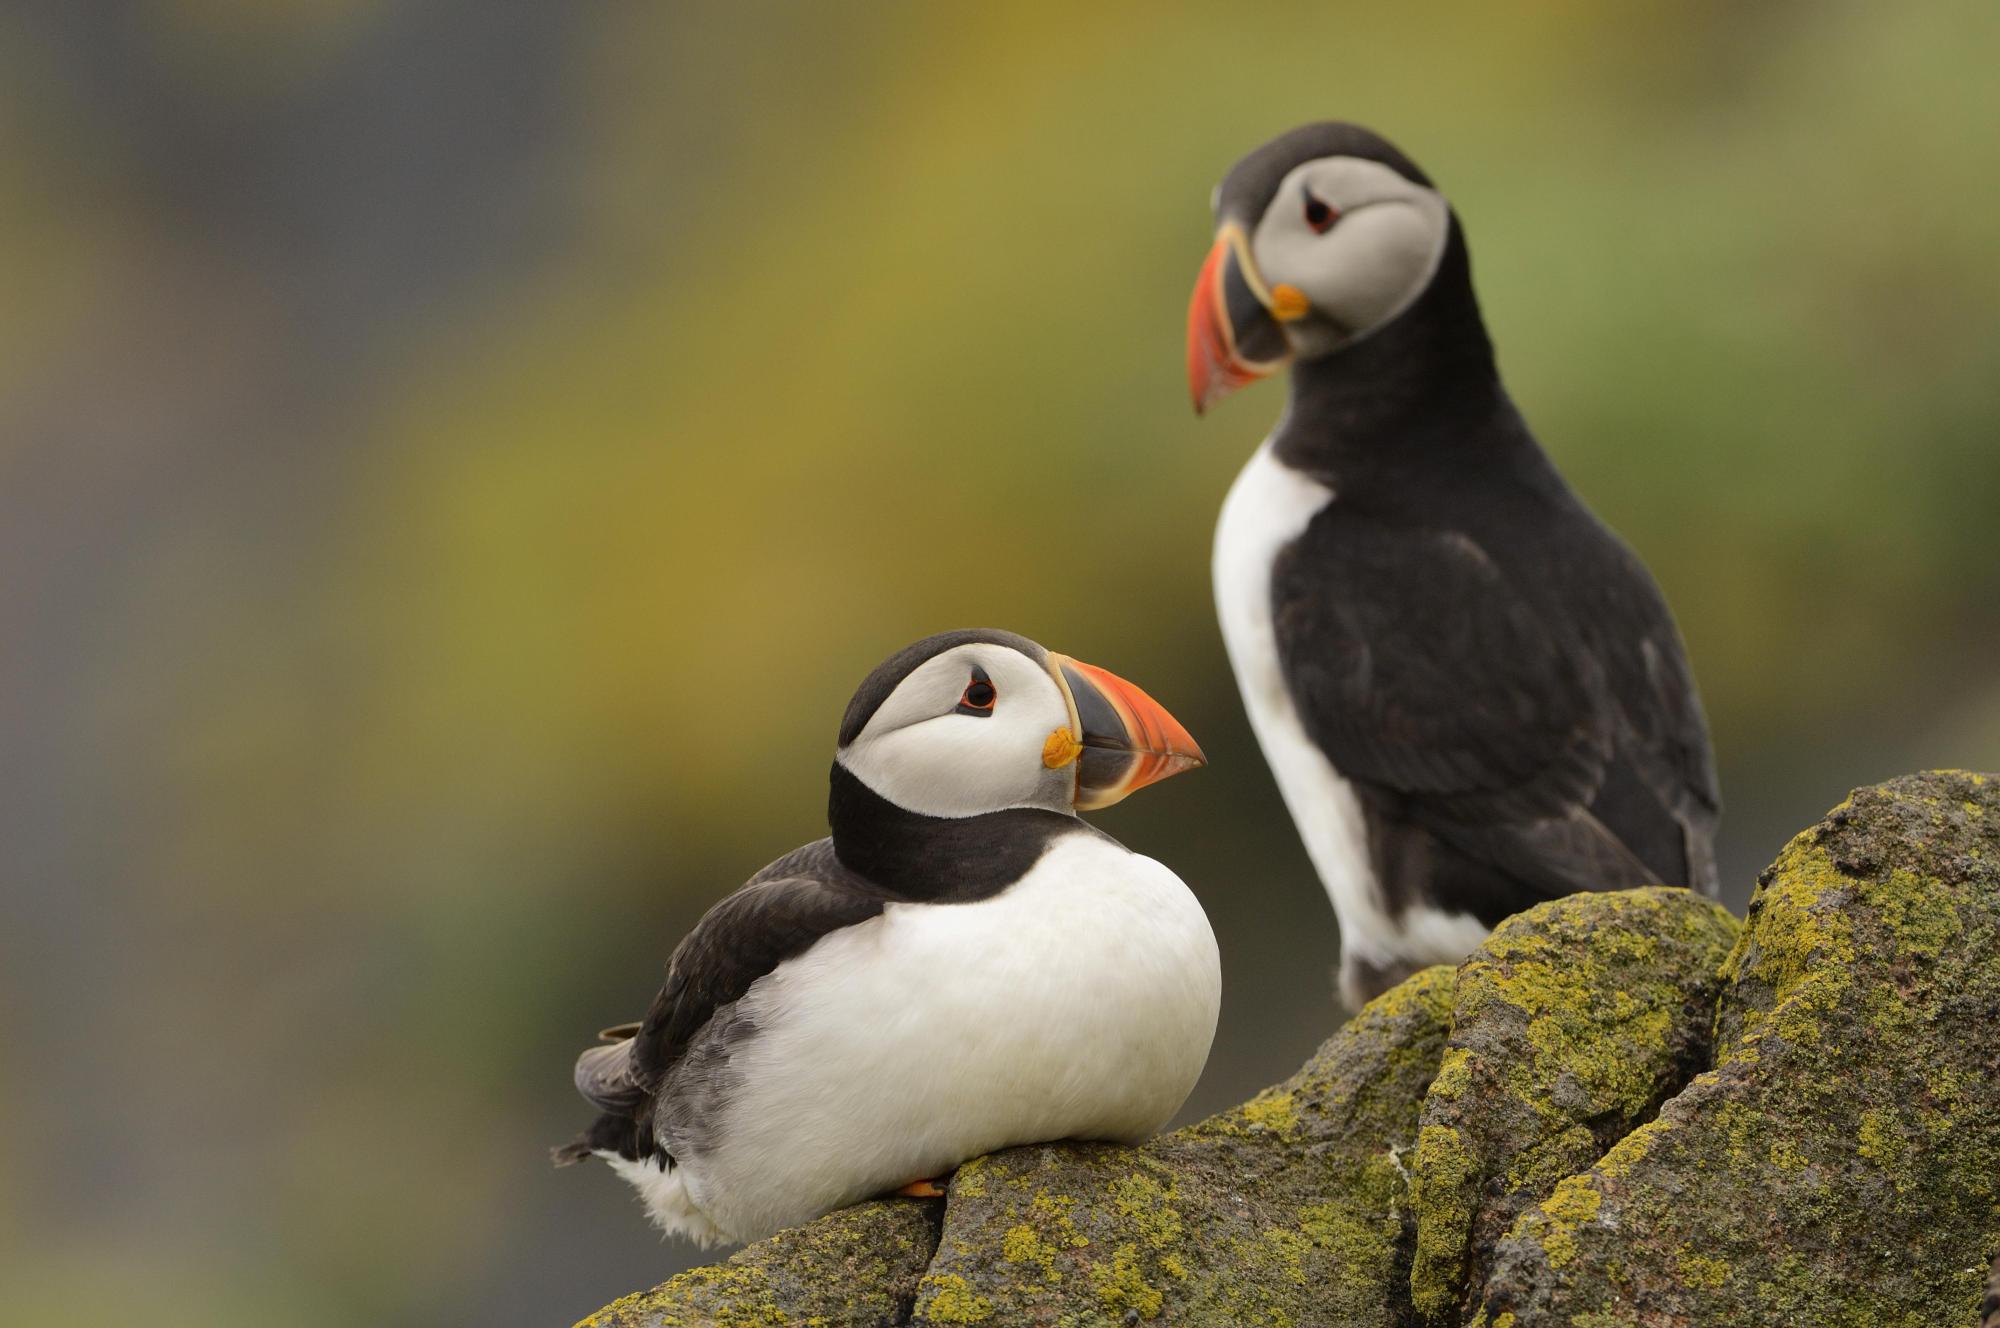 Two Puffins sitting on a rock